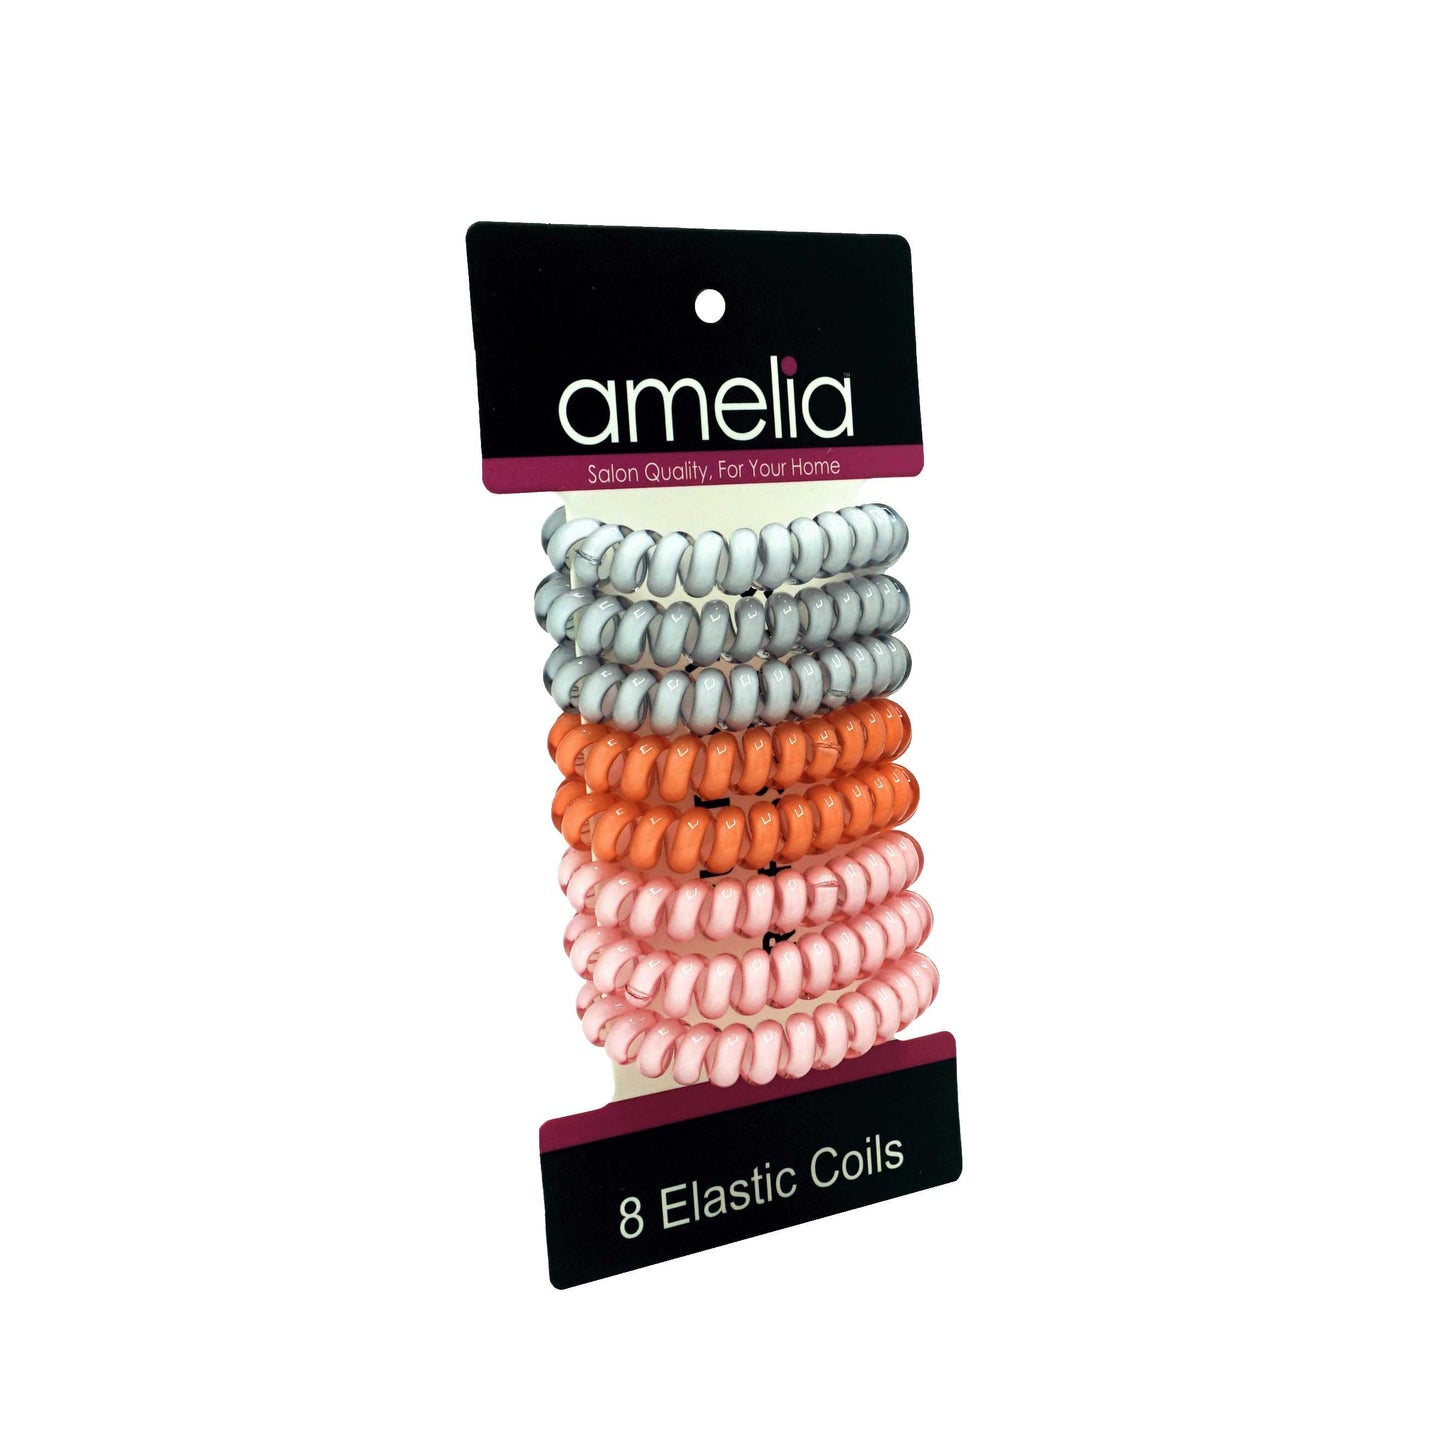 Amelia Beauty Products 8 Medium Elastic Hair Coils, 2.0in Diameter Thick Spiral Hair Ties, Gentle on Hair, Strong Hold and Minimizes Dents and Creases, Pink, Orange and White Mix